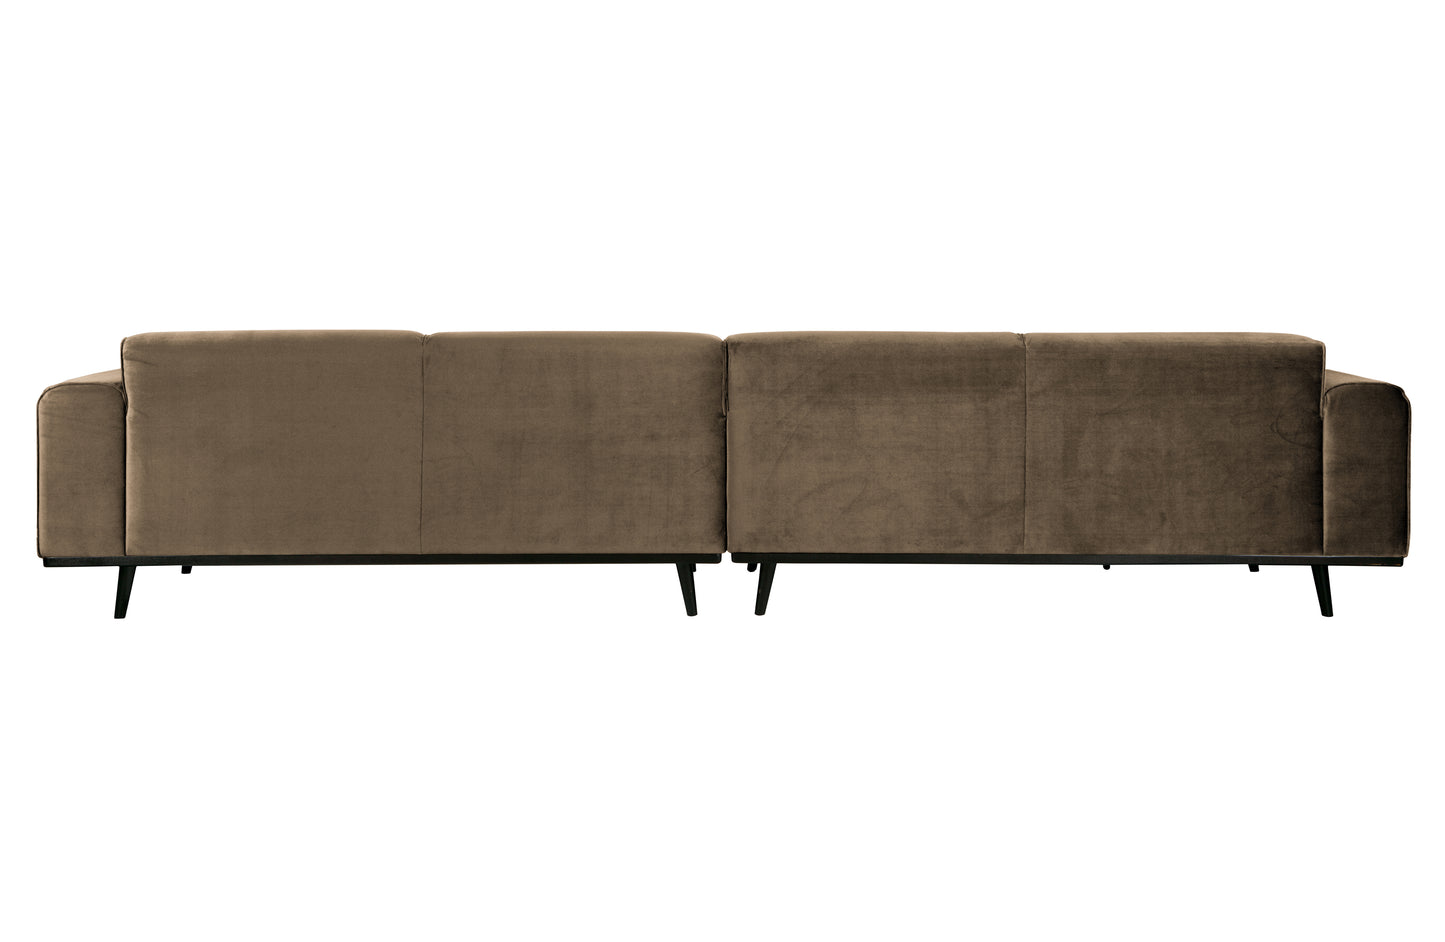 BEPUREHOME | Statement Xl - 4-sits soffa, 372 Cm Velour Taupe